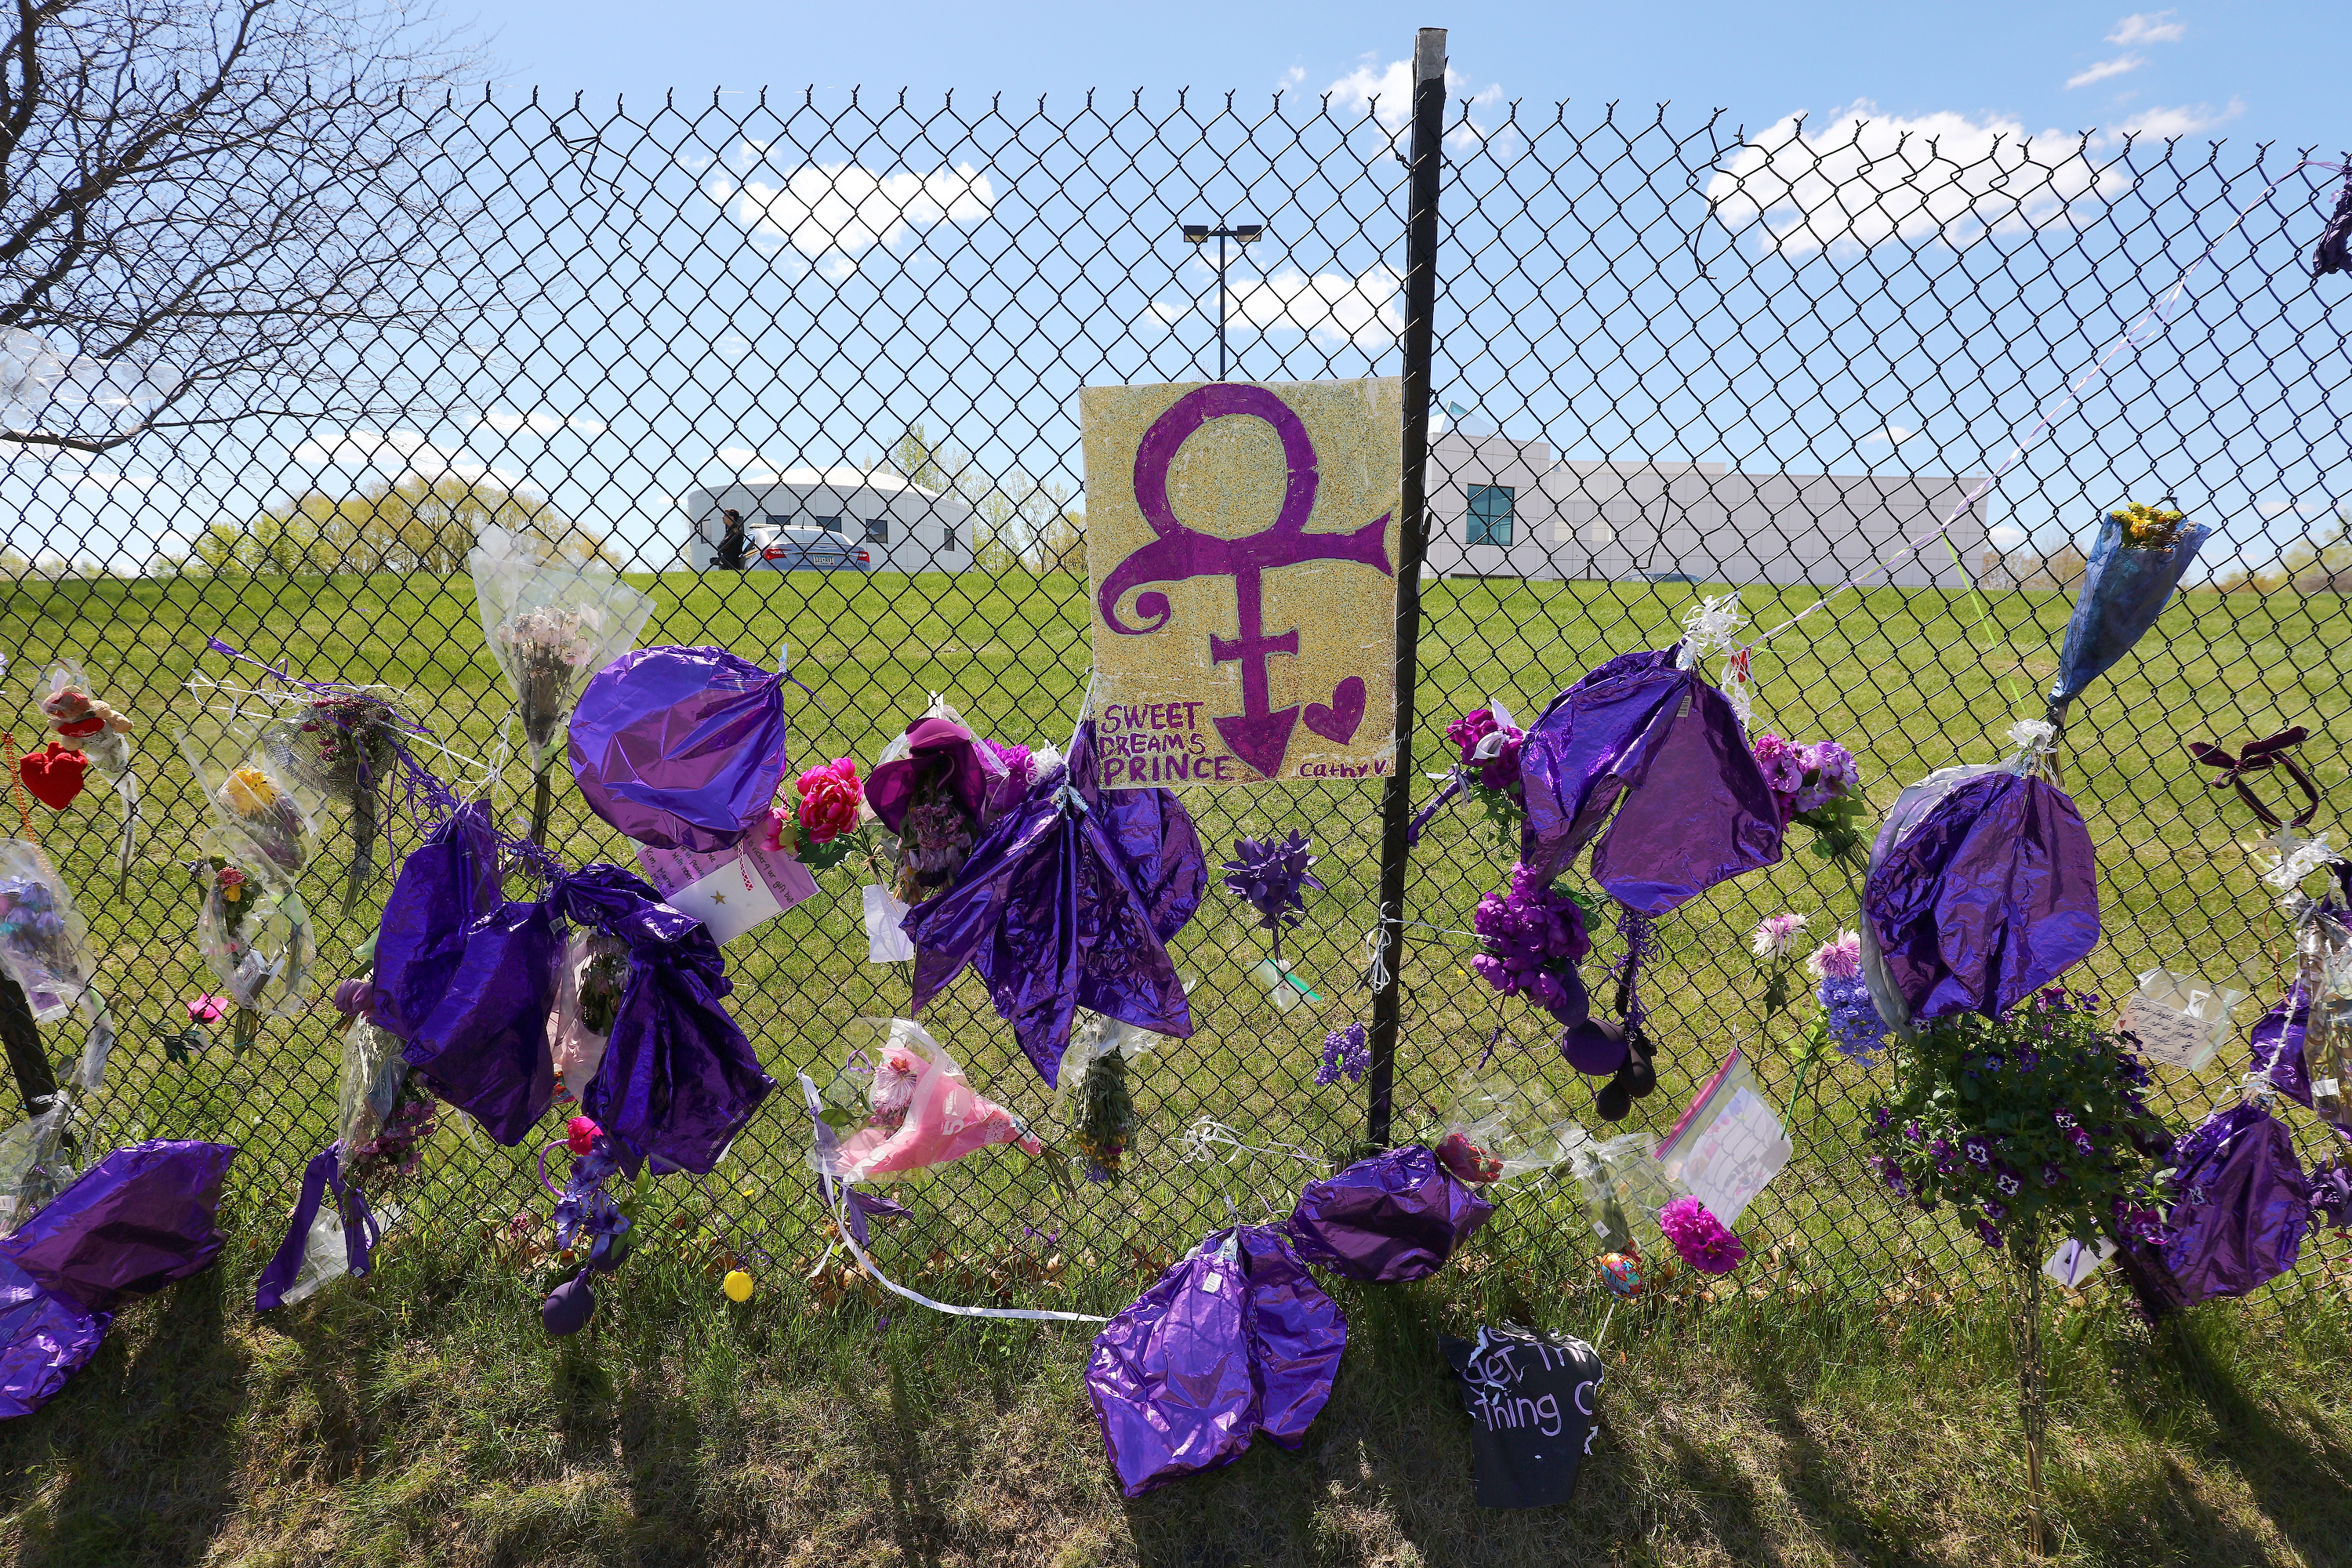 Tributes and memorials dedicated to Prince on the fence that surrounds Paisley Park on May 2, 2016 in Chaska, Minnesota. (Adam Bettcher&mdash;Getty Images)